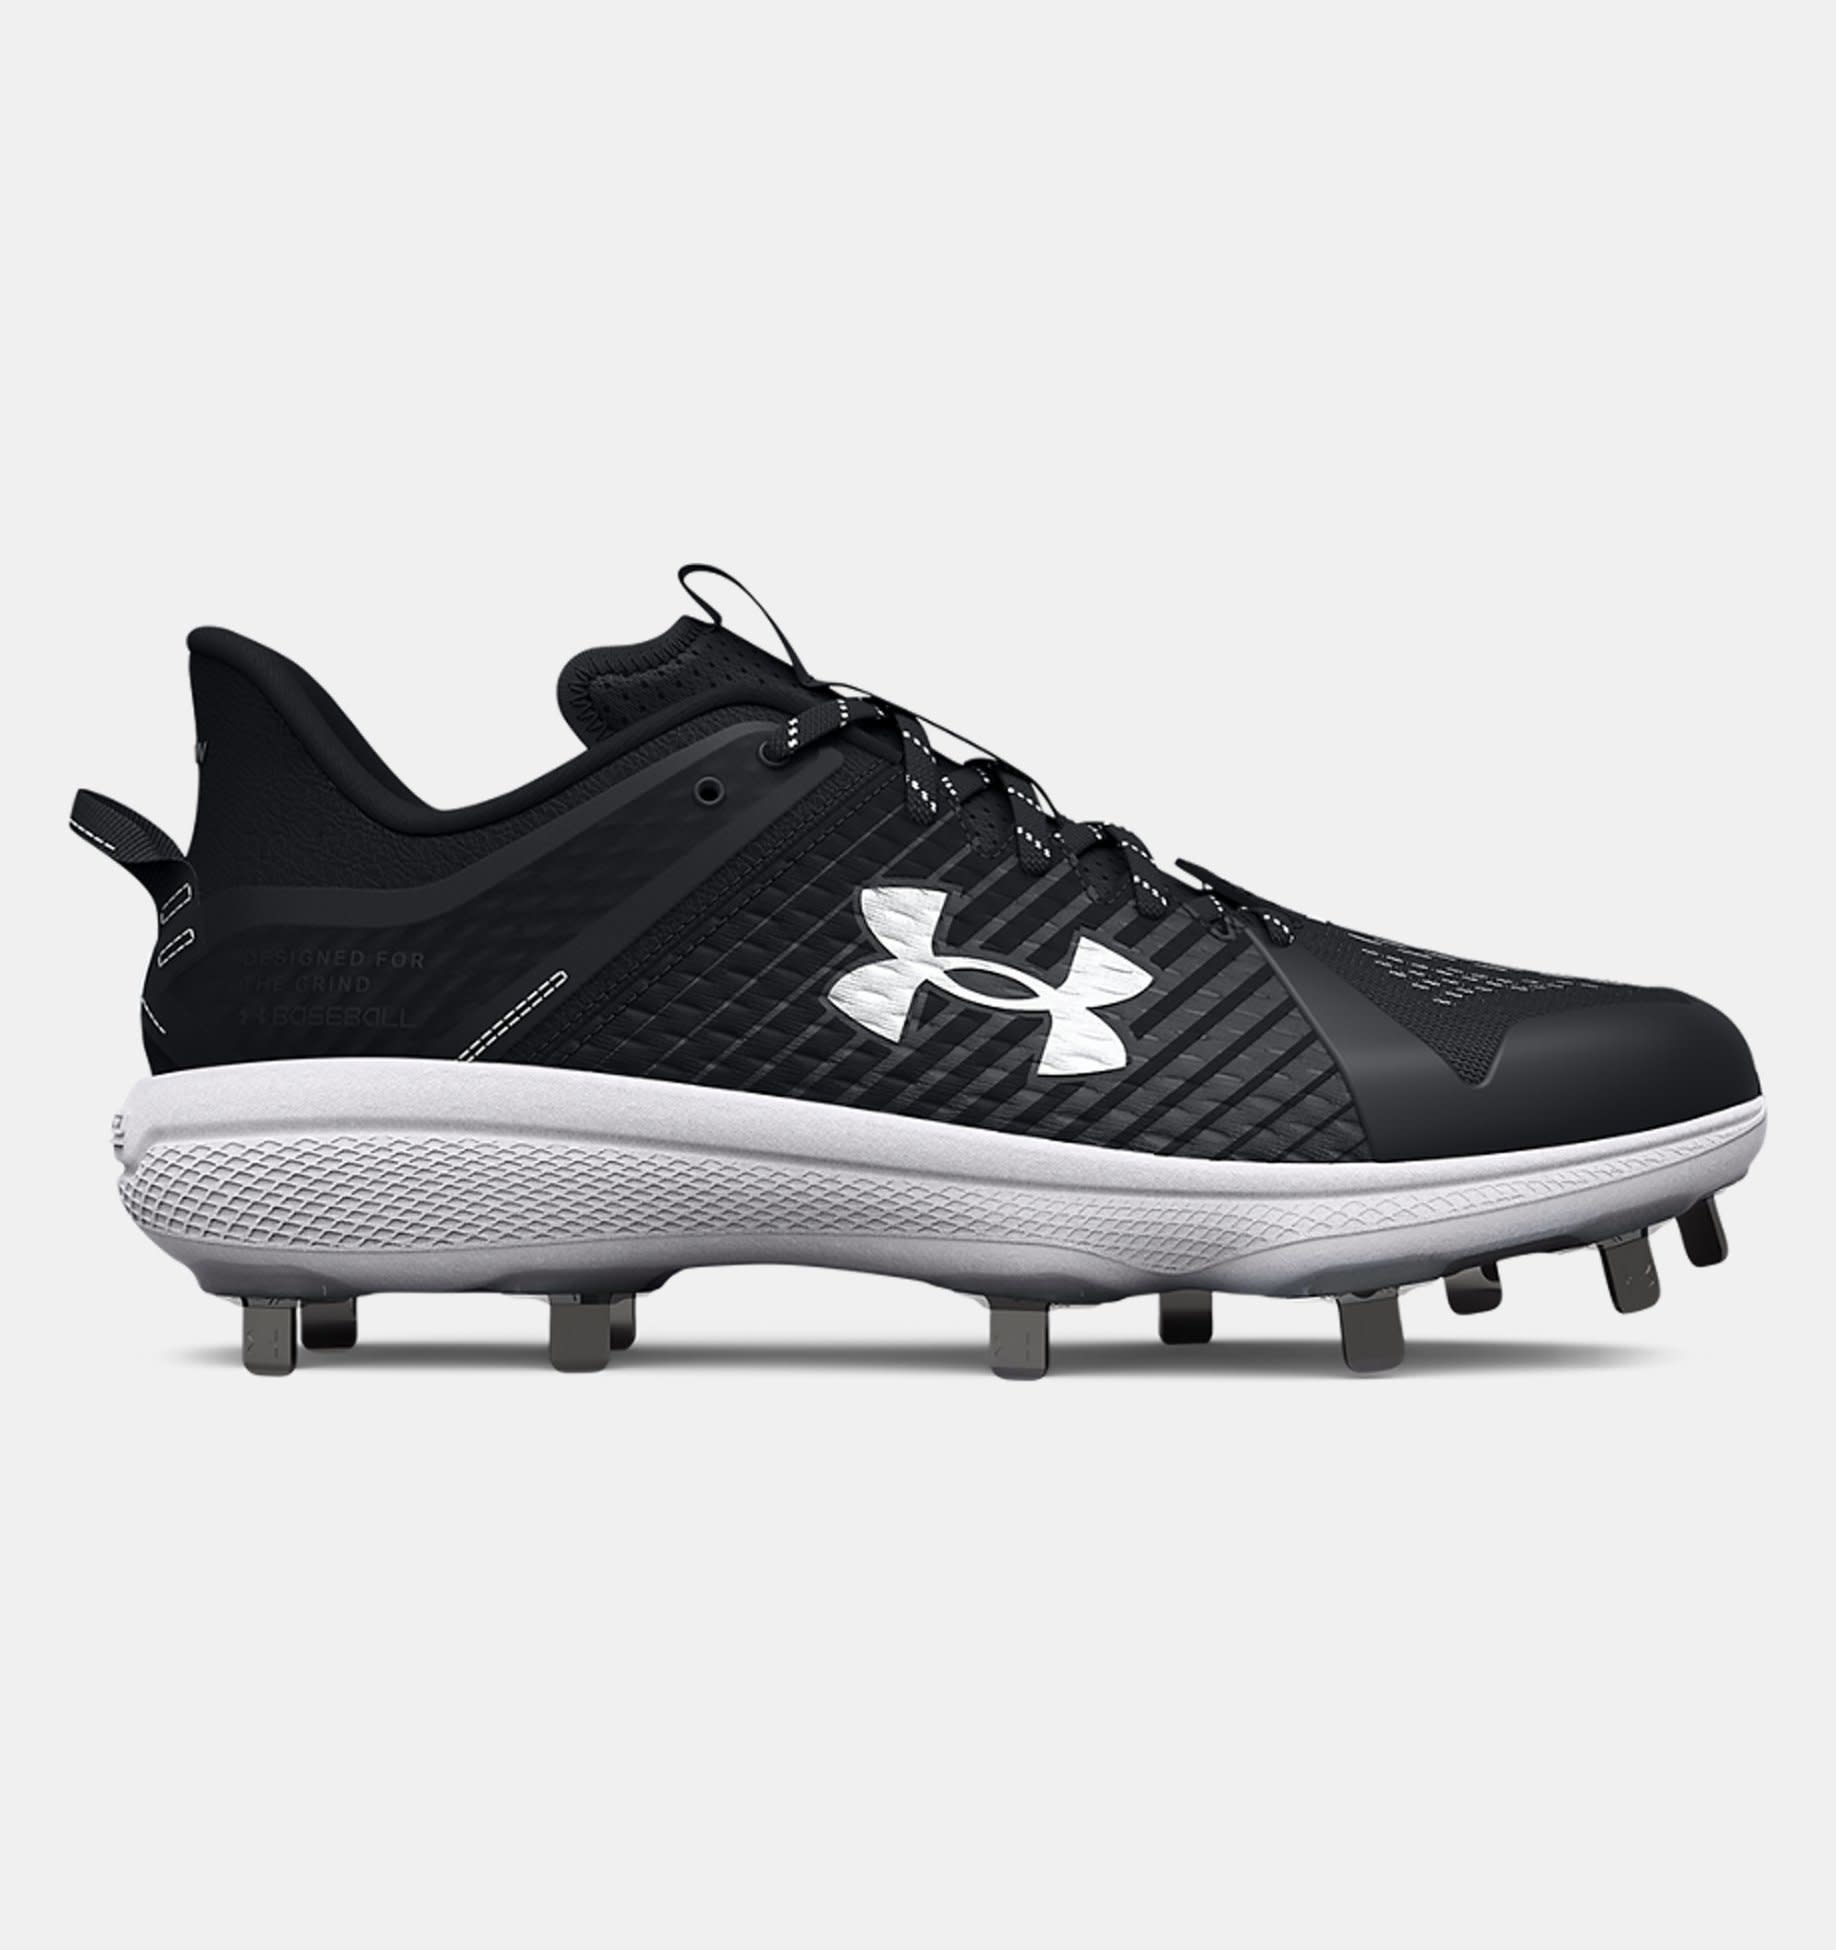 Under Armour Men's Yard low MT baseball cleats